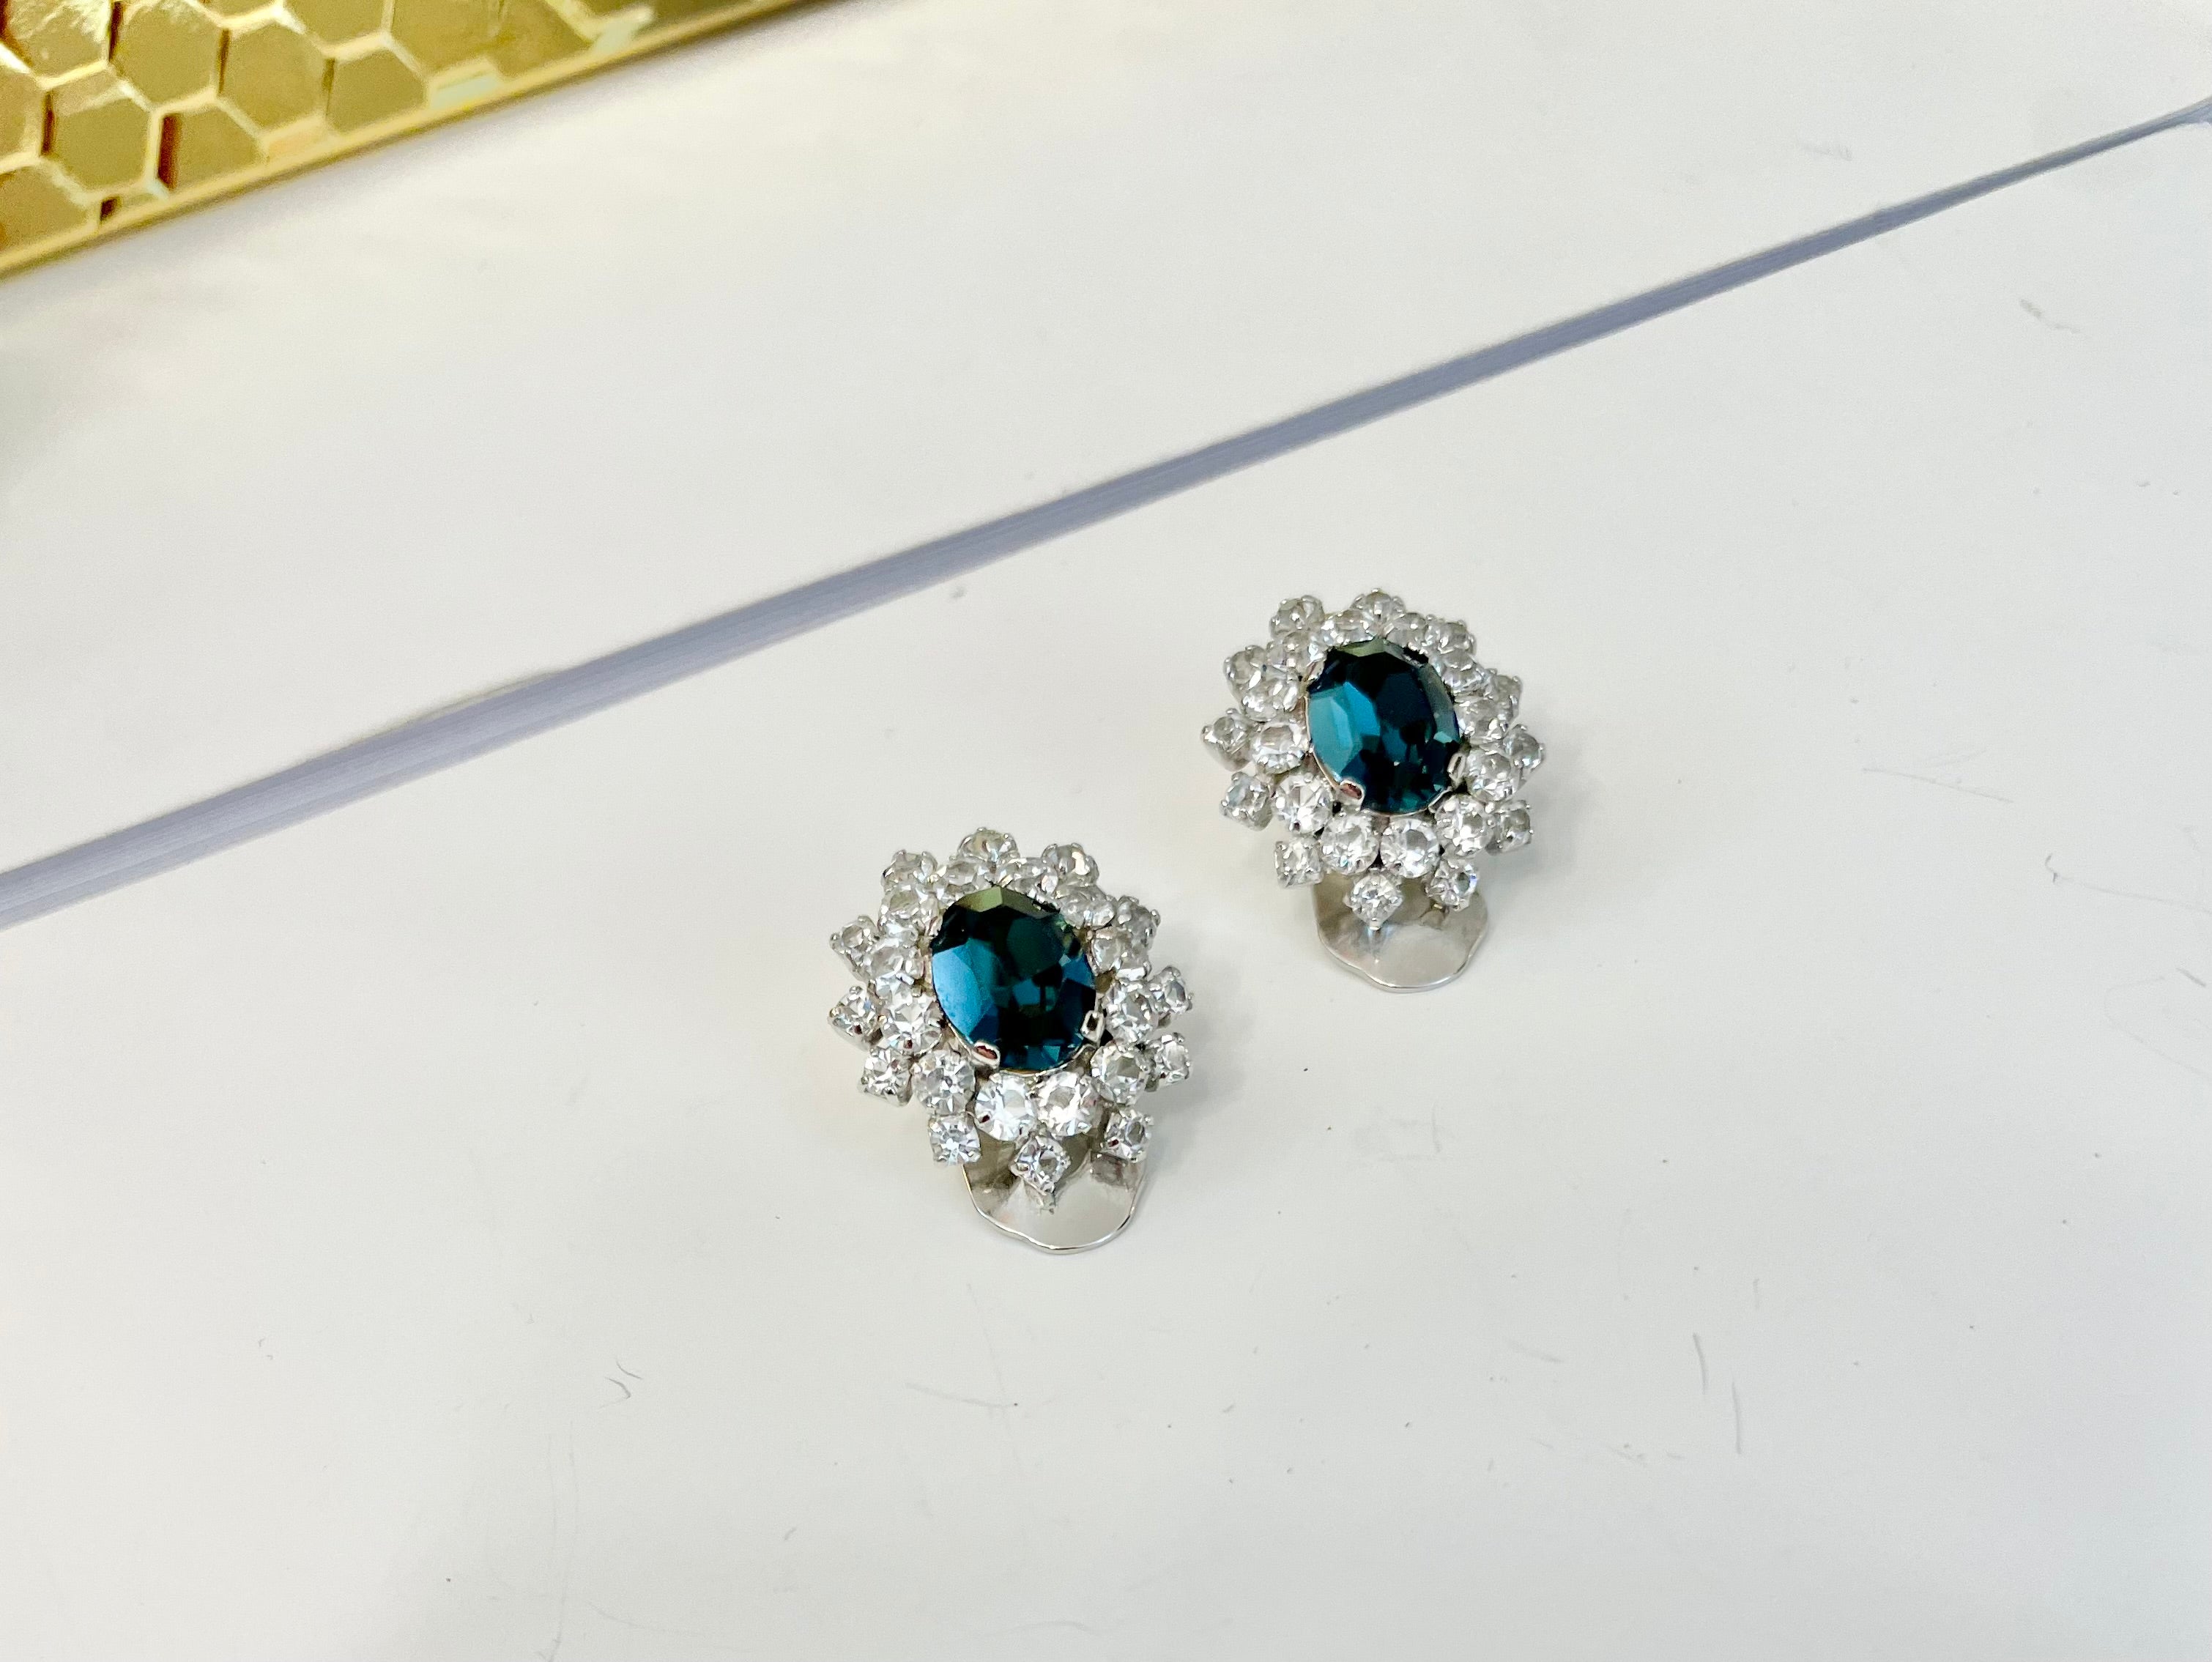 The most stunning sapphire glass button earrings.... so elegant